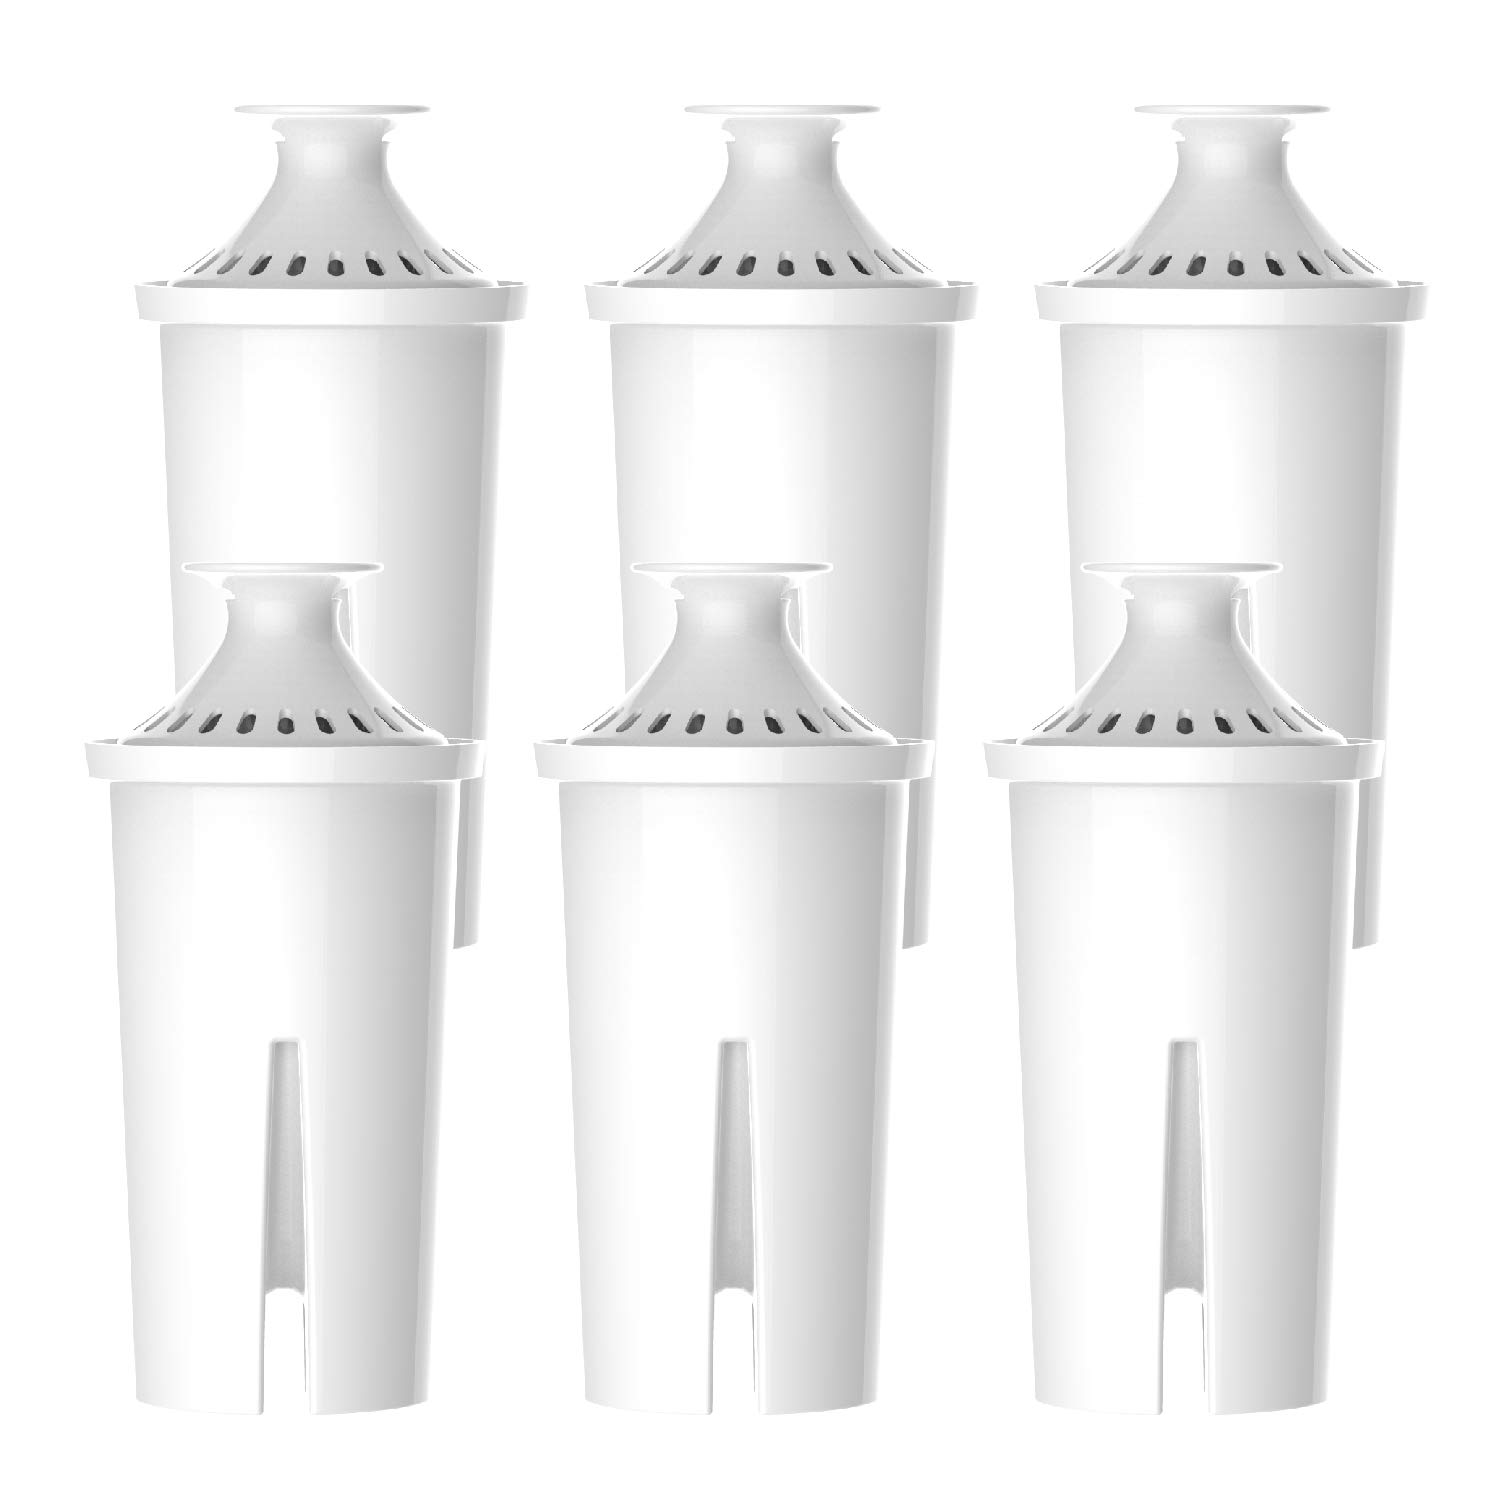 Waterspecialist NSF Certified Pitcher Water Filter, Replacement for Brita® classic 35557, OB03, Mavea® 107007, Brita® Pitchers Grand, Lake, Capri, Wave and More (Pack of 6)